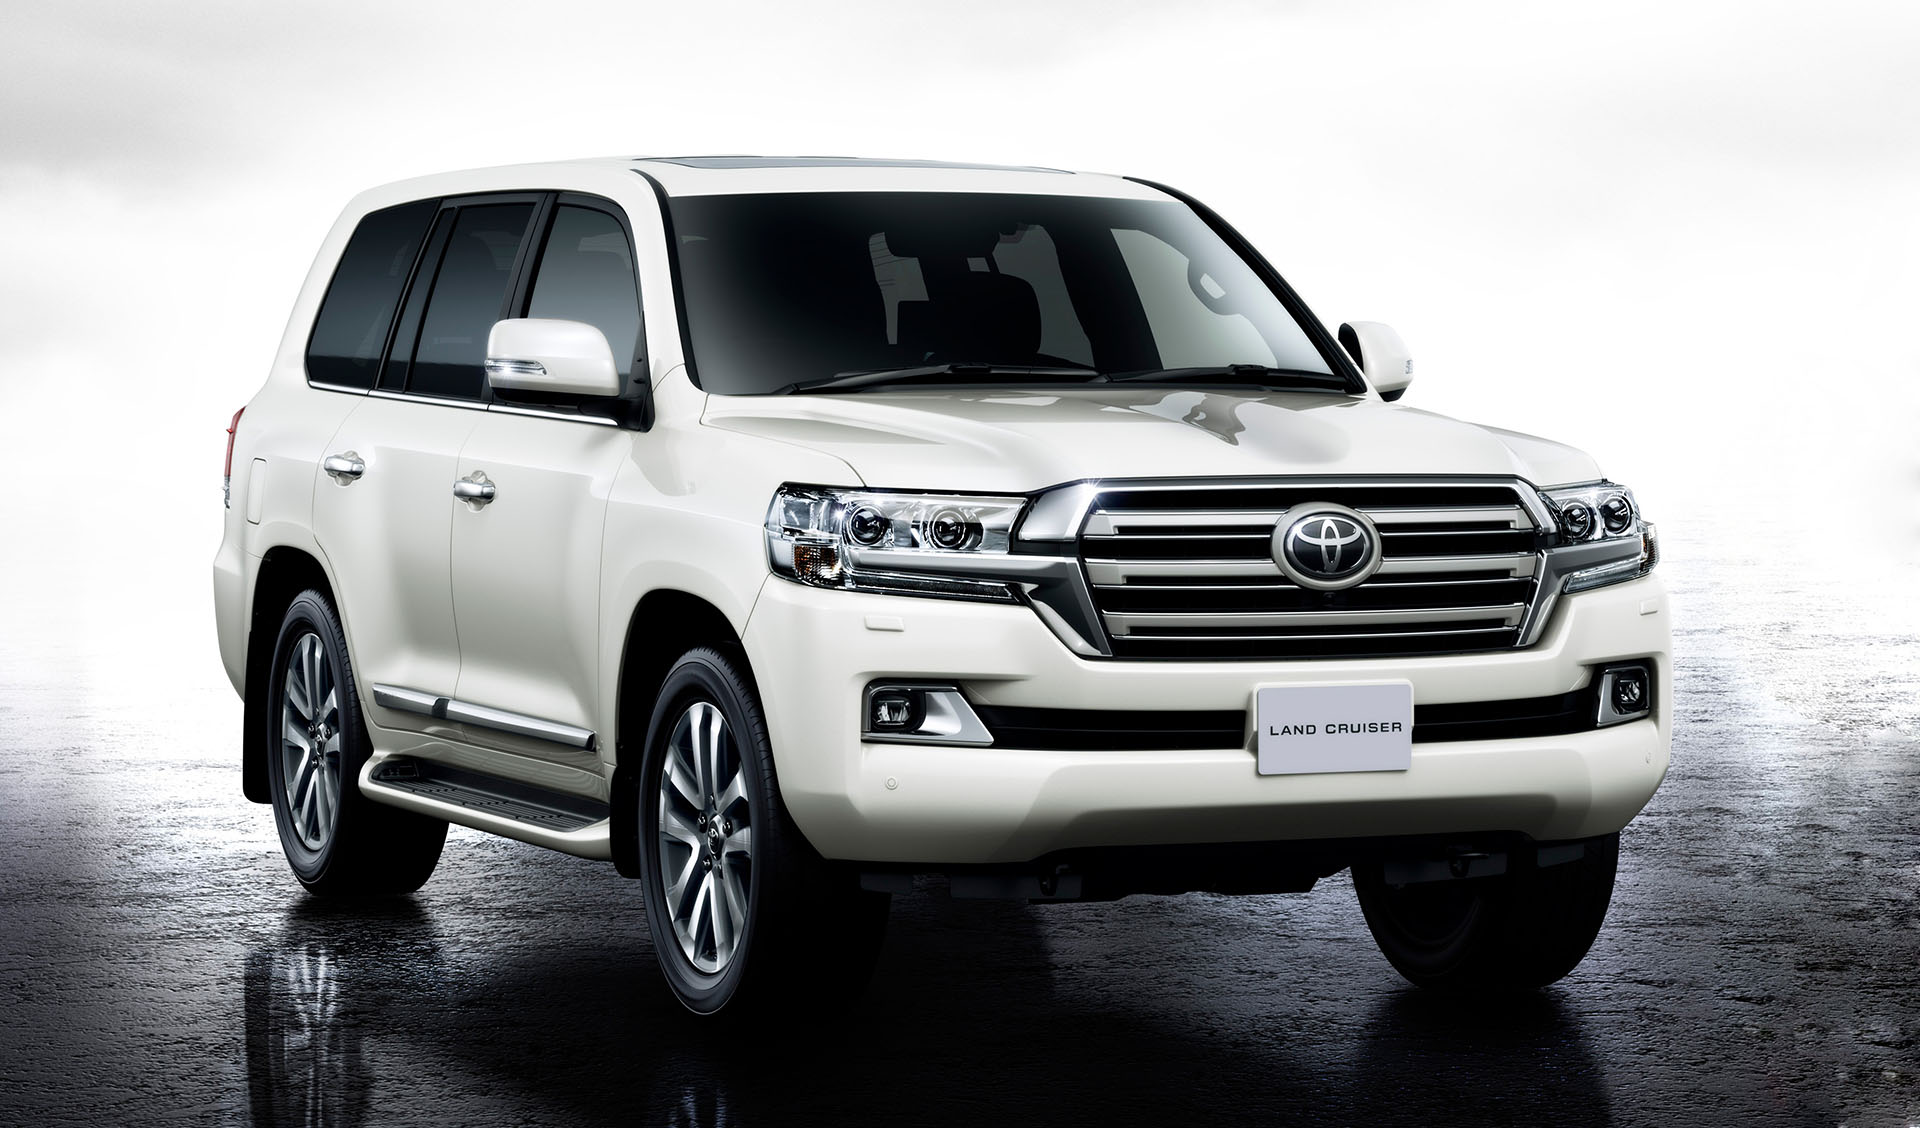 Land Cruiser V8 2019 Price in Pakistan Specs Features Reviews Pics